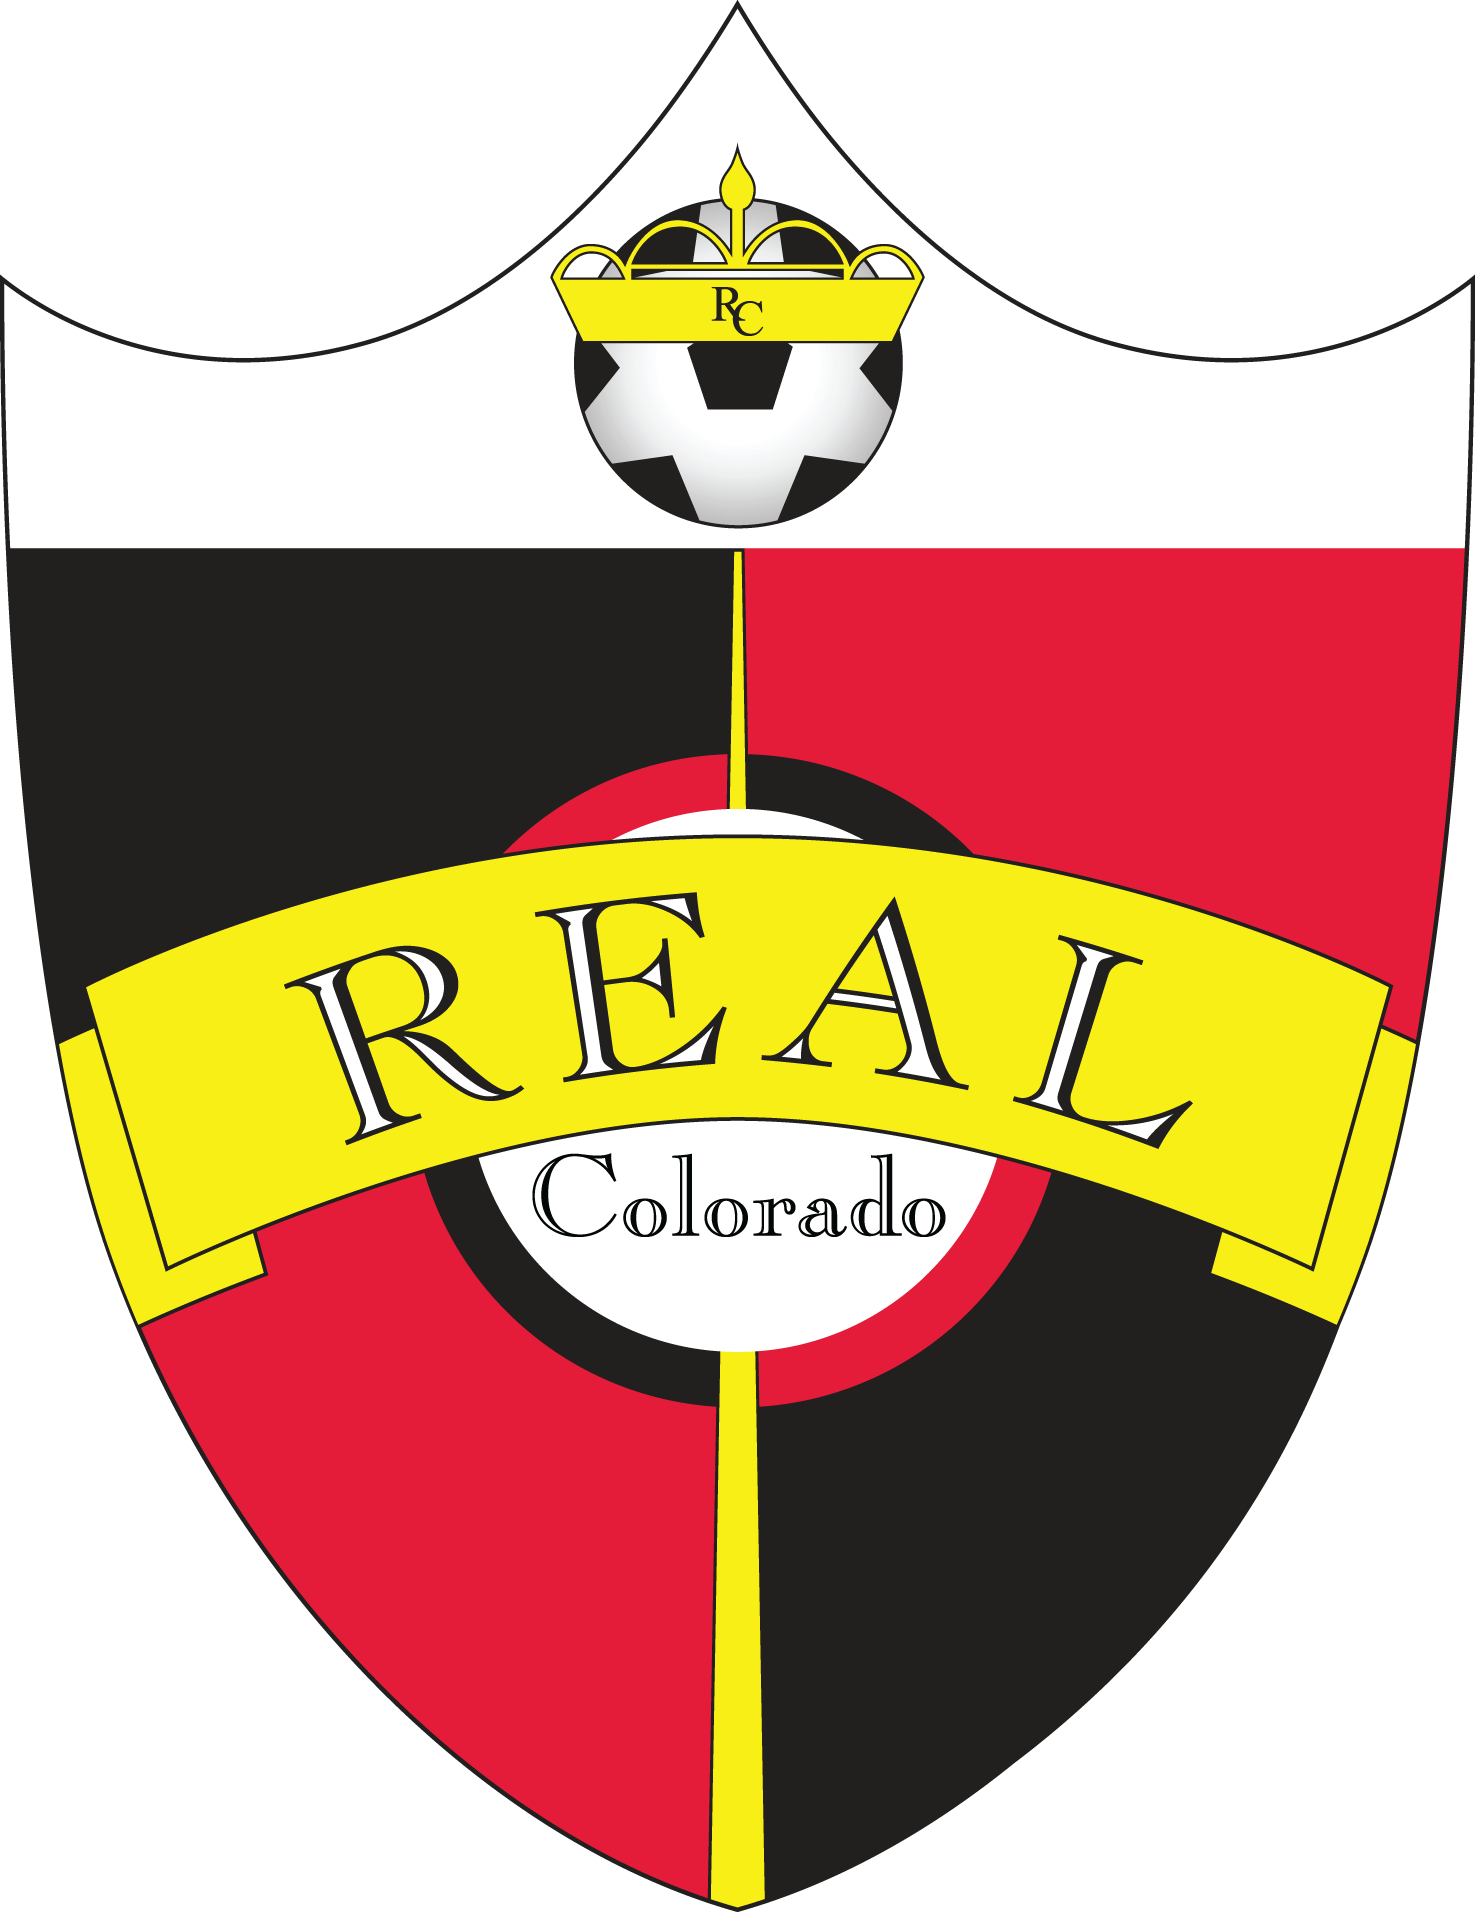 Real Colorado Soccer Logo and PureShock Nutrition